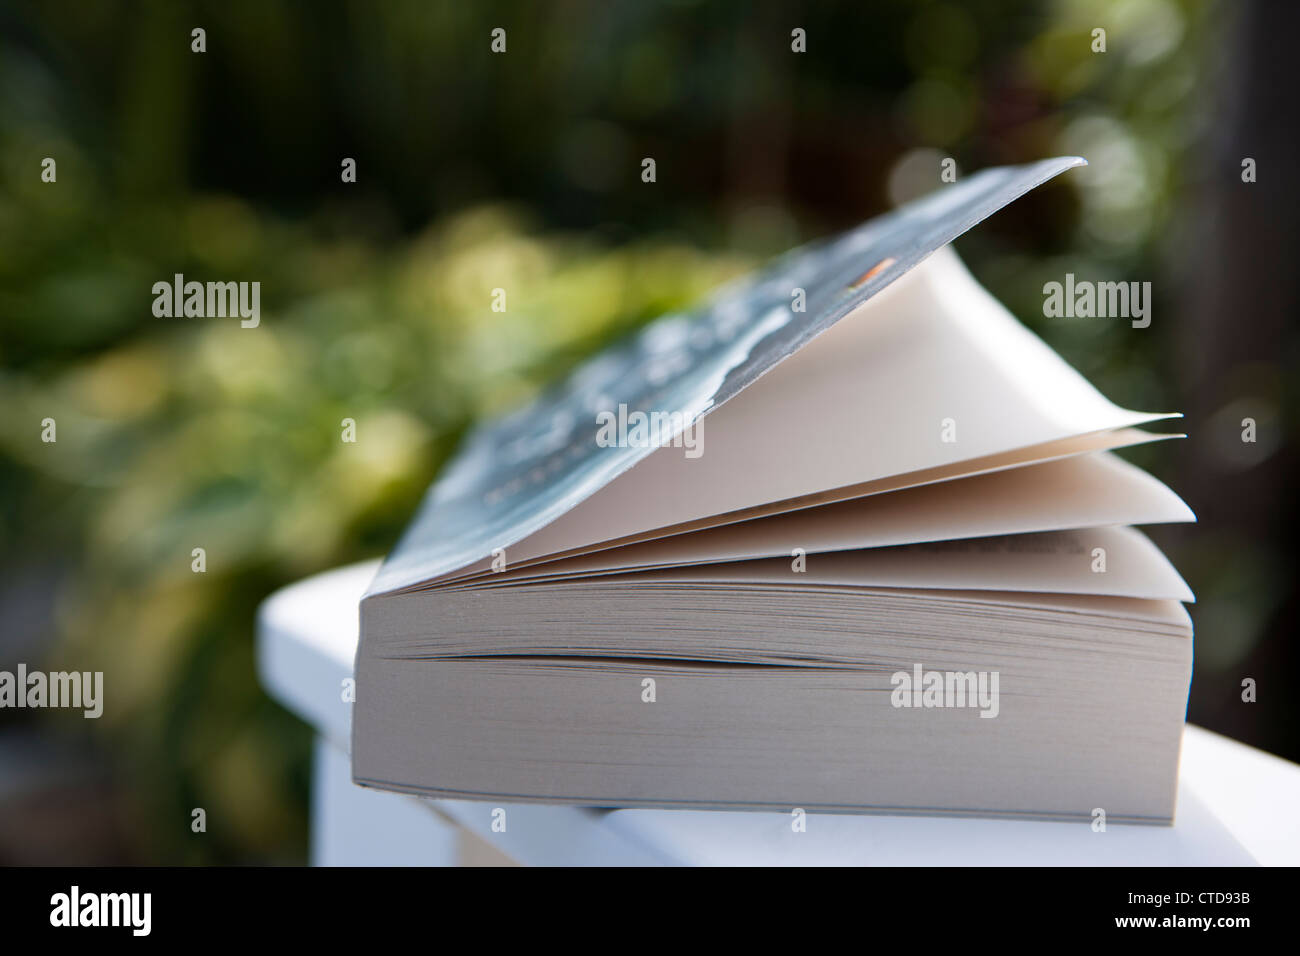 Shallow focus image of a book outdoors Stock Photo